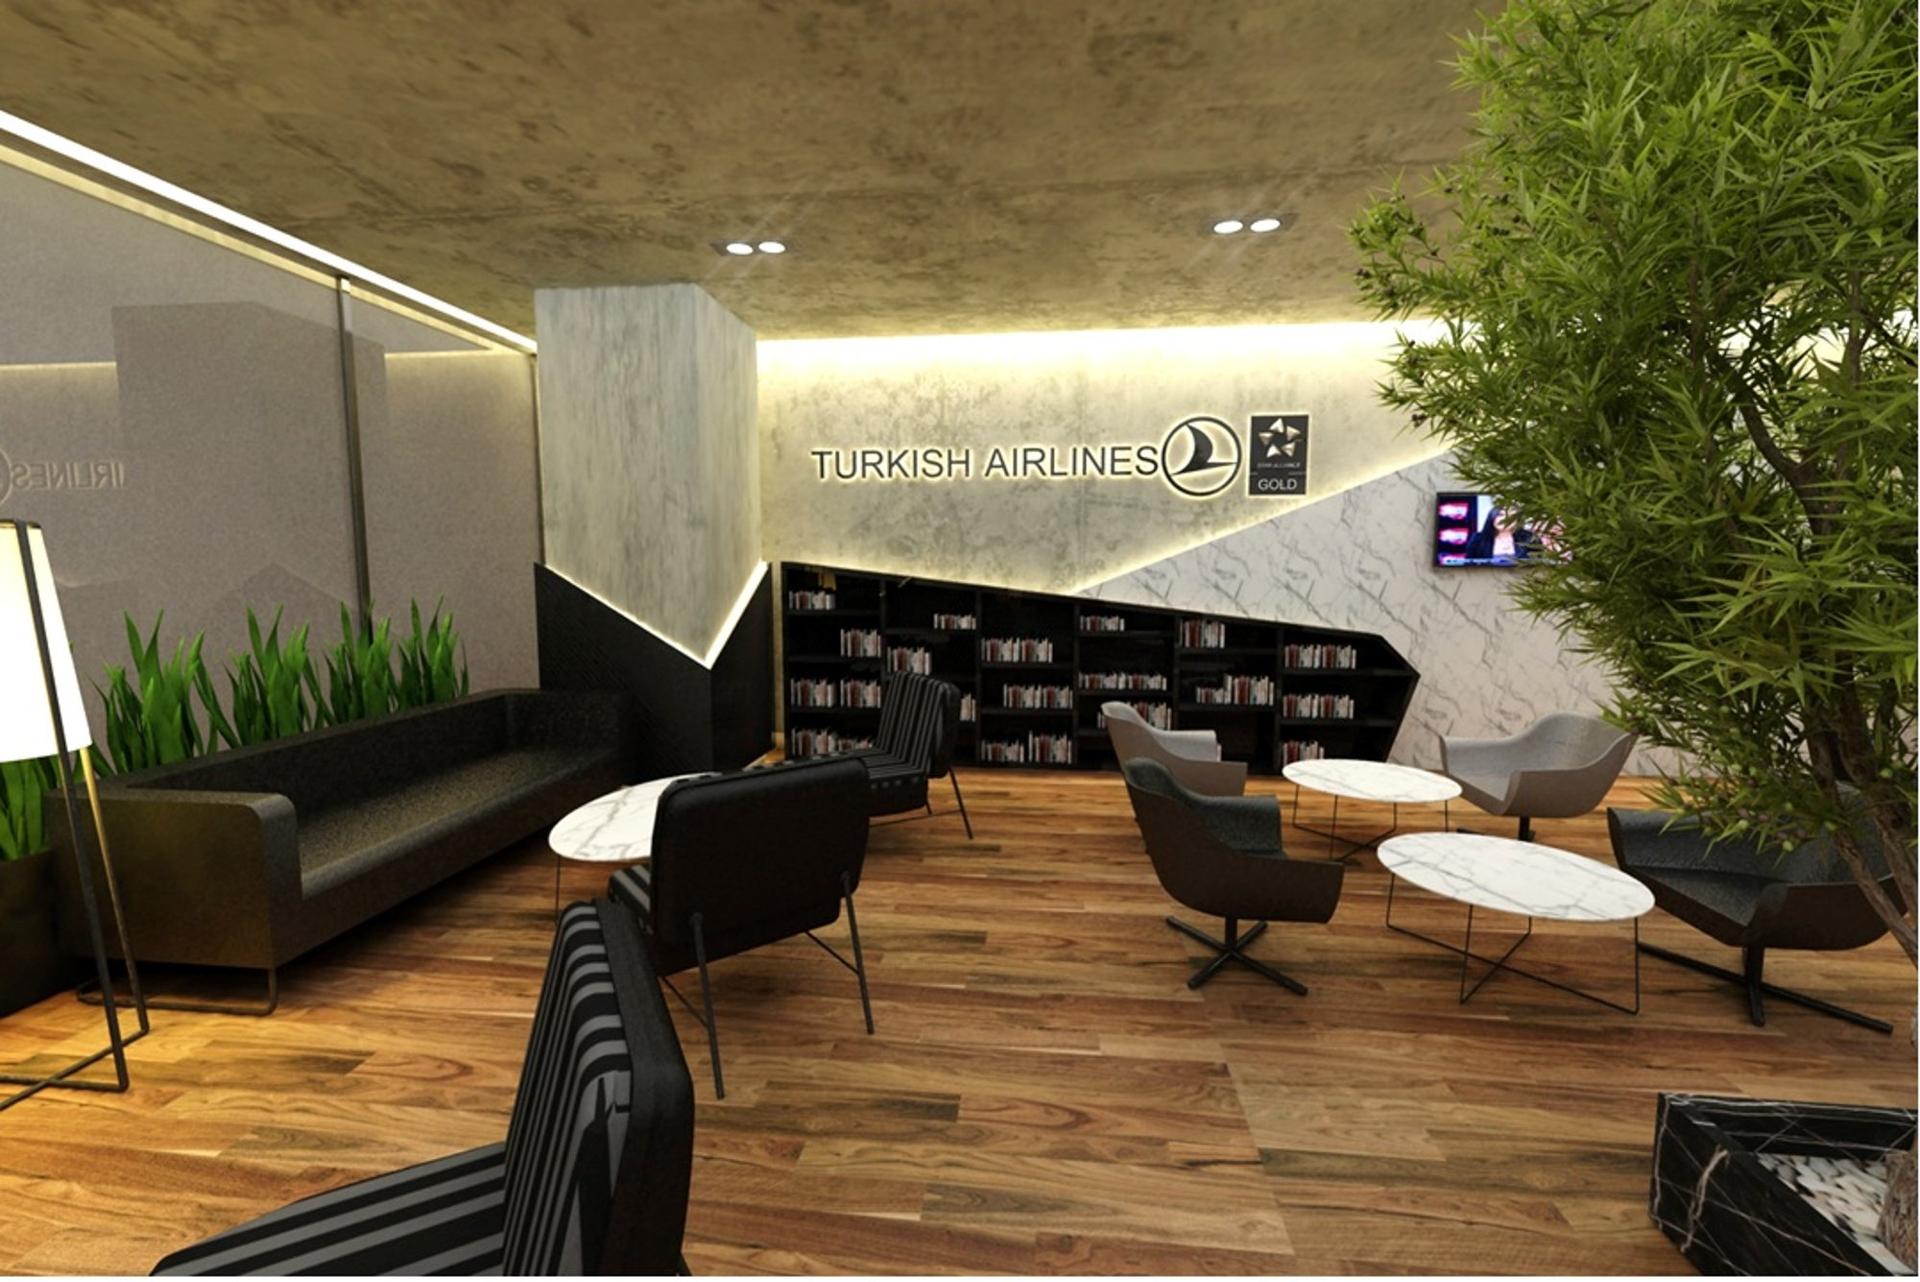 Turkish Airlines CIP Lounge (Business Lounge) image 9 of 27